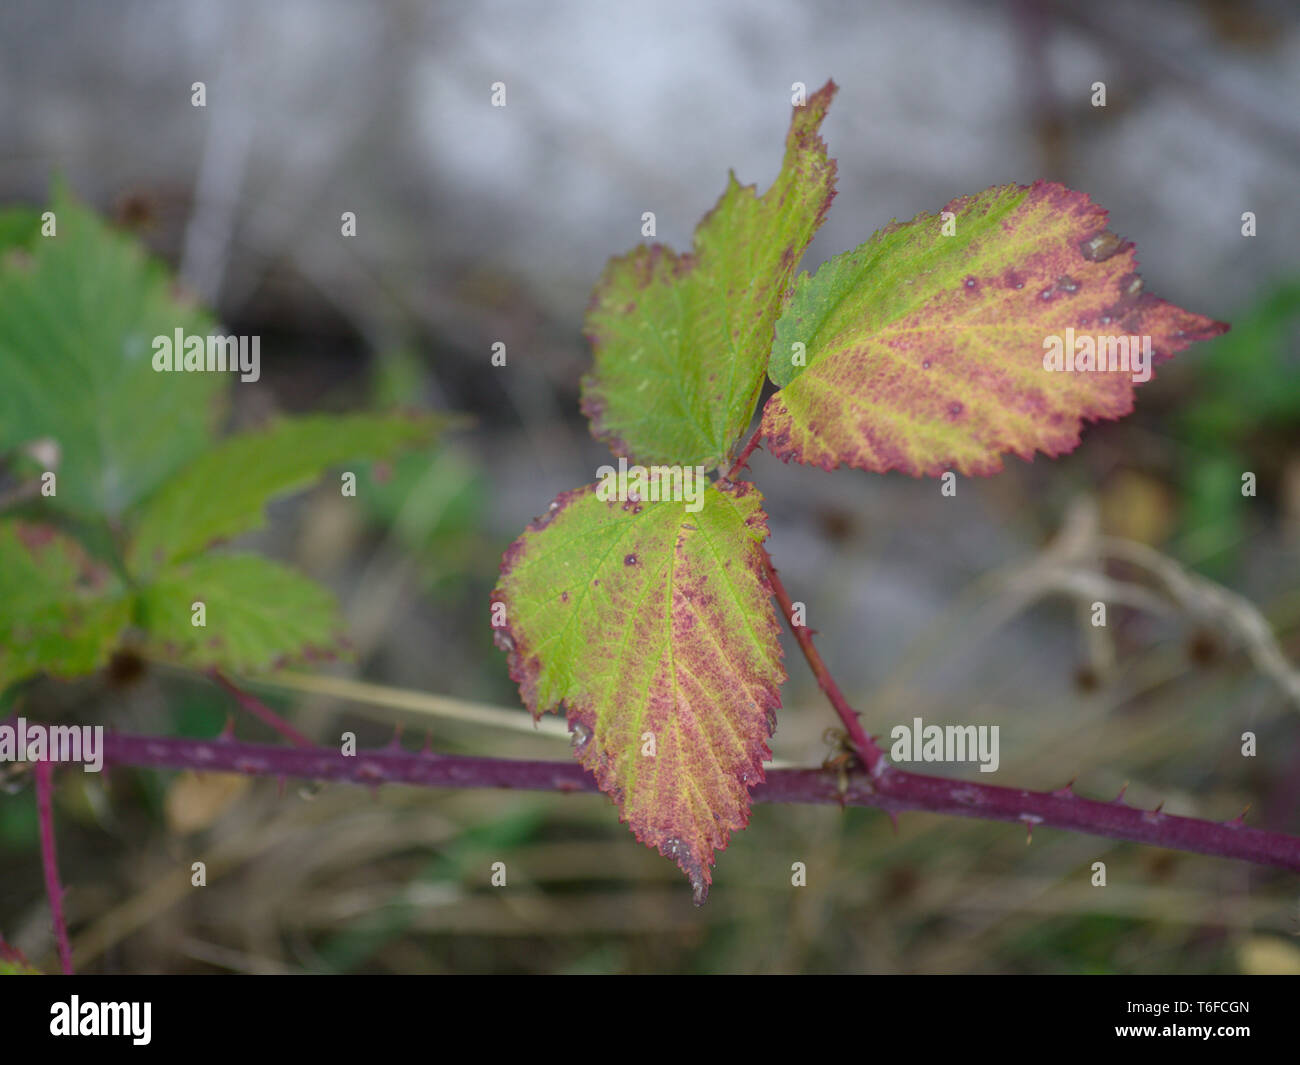 Reddish purple colored leaves on a twig with thorns Stock Photo